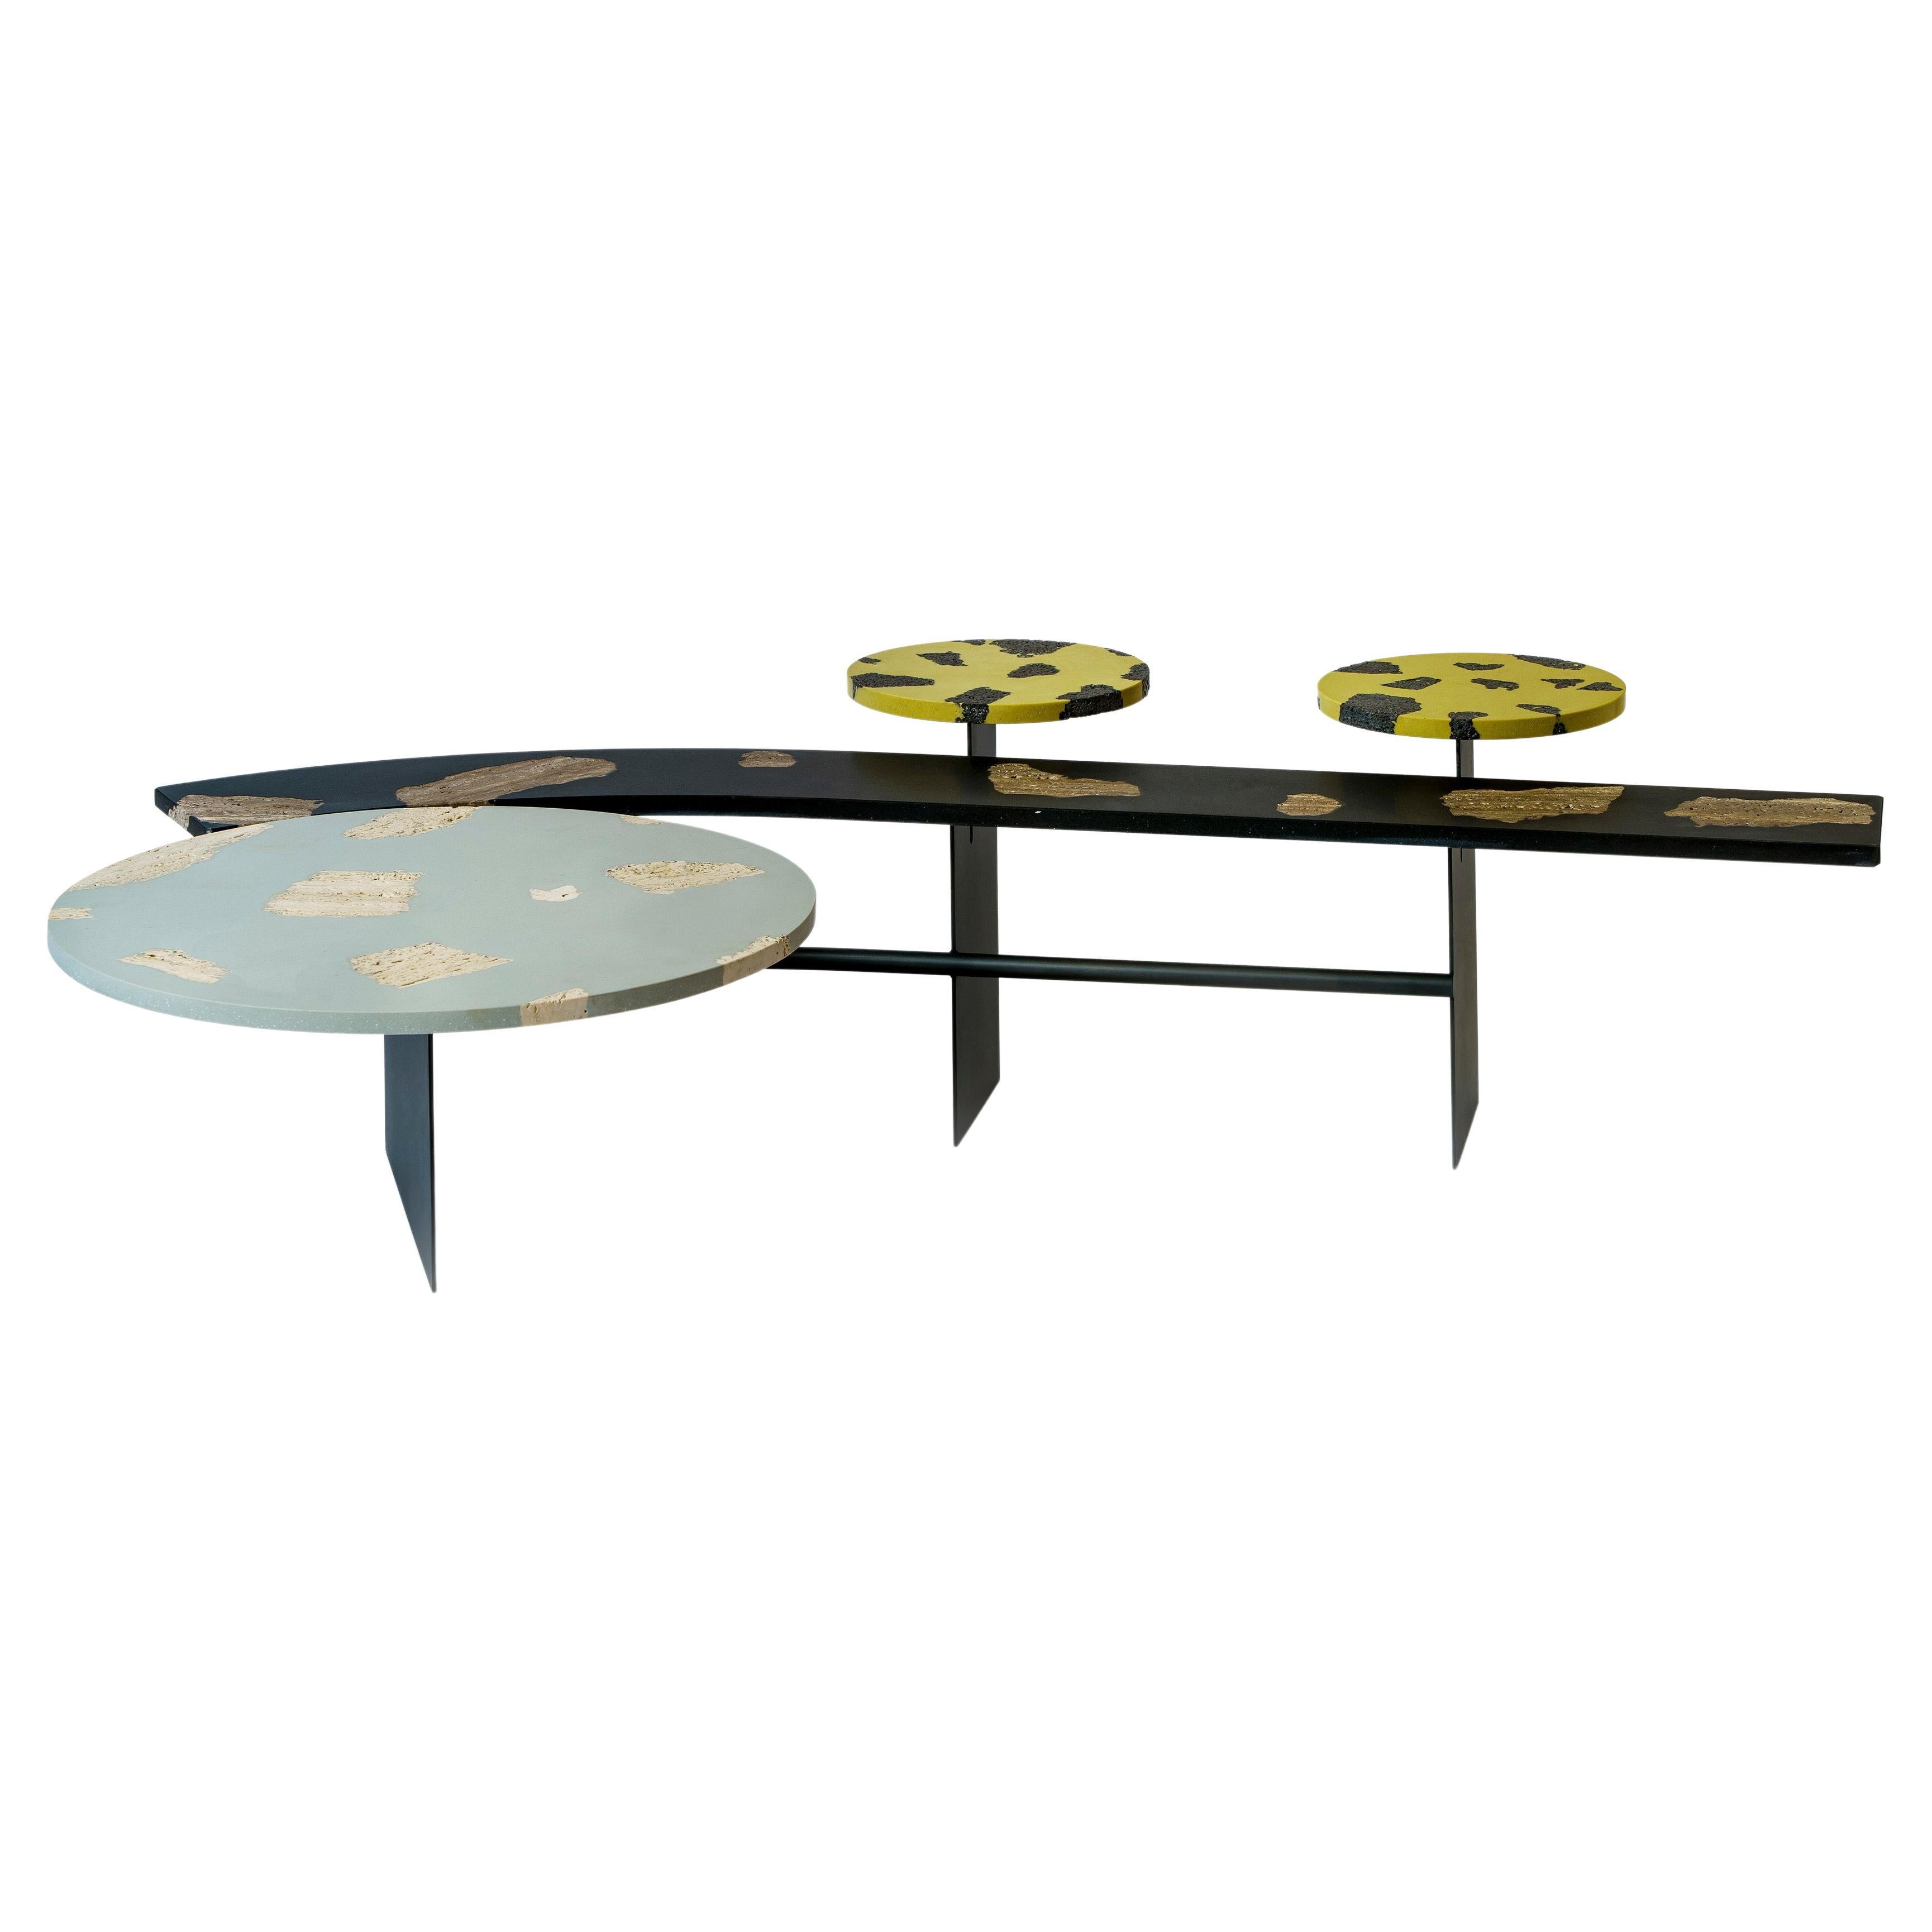 Yellow, Black, Gray Mimante Coffee Table 1 by Andrea Steidl for Delvis Unlimited